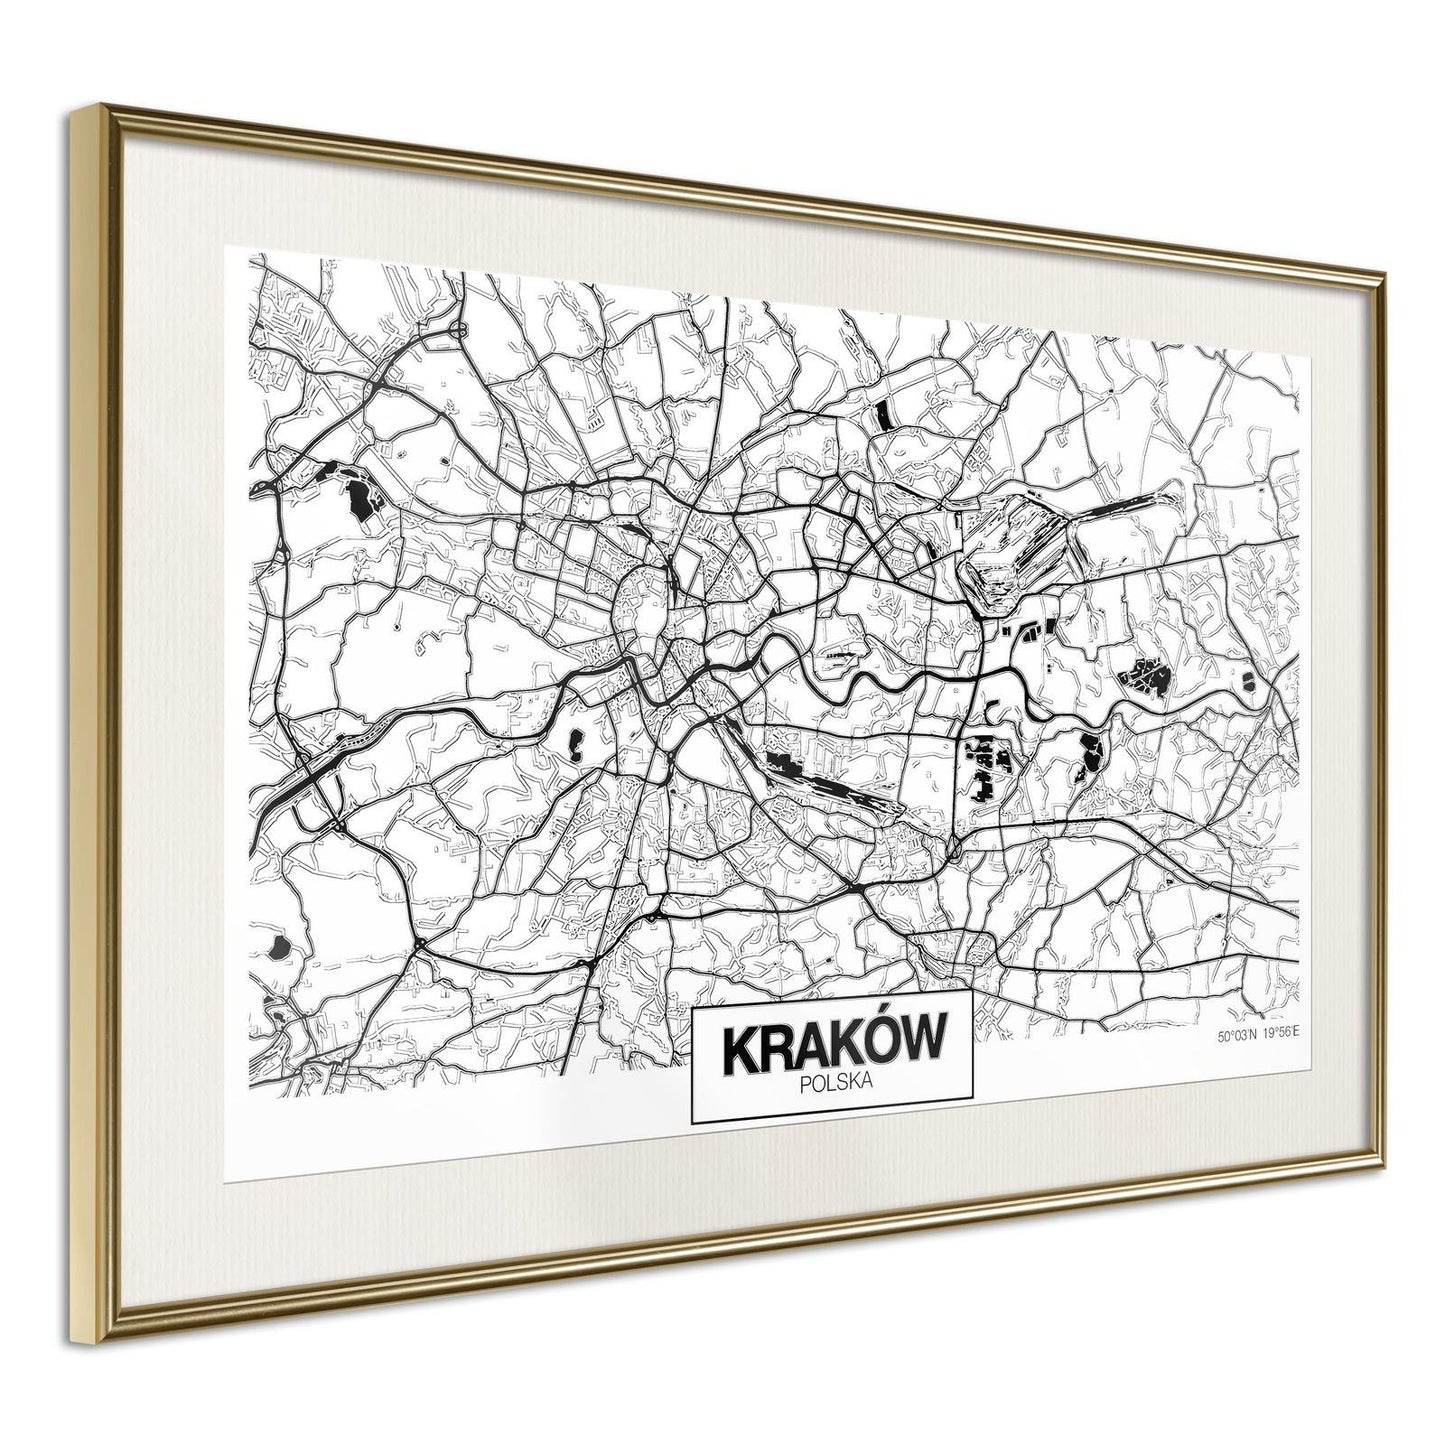 City Map: Cracow